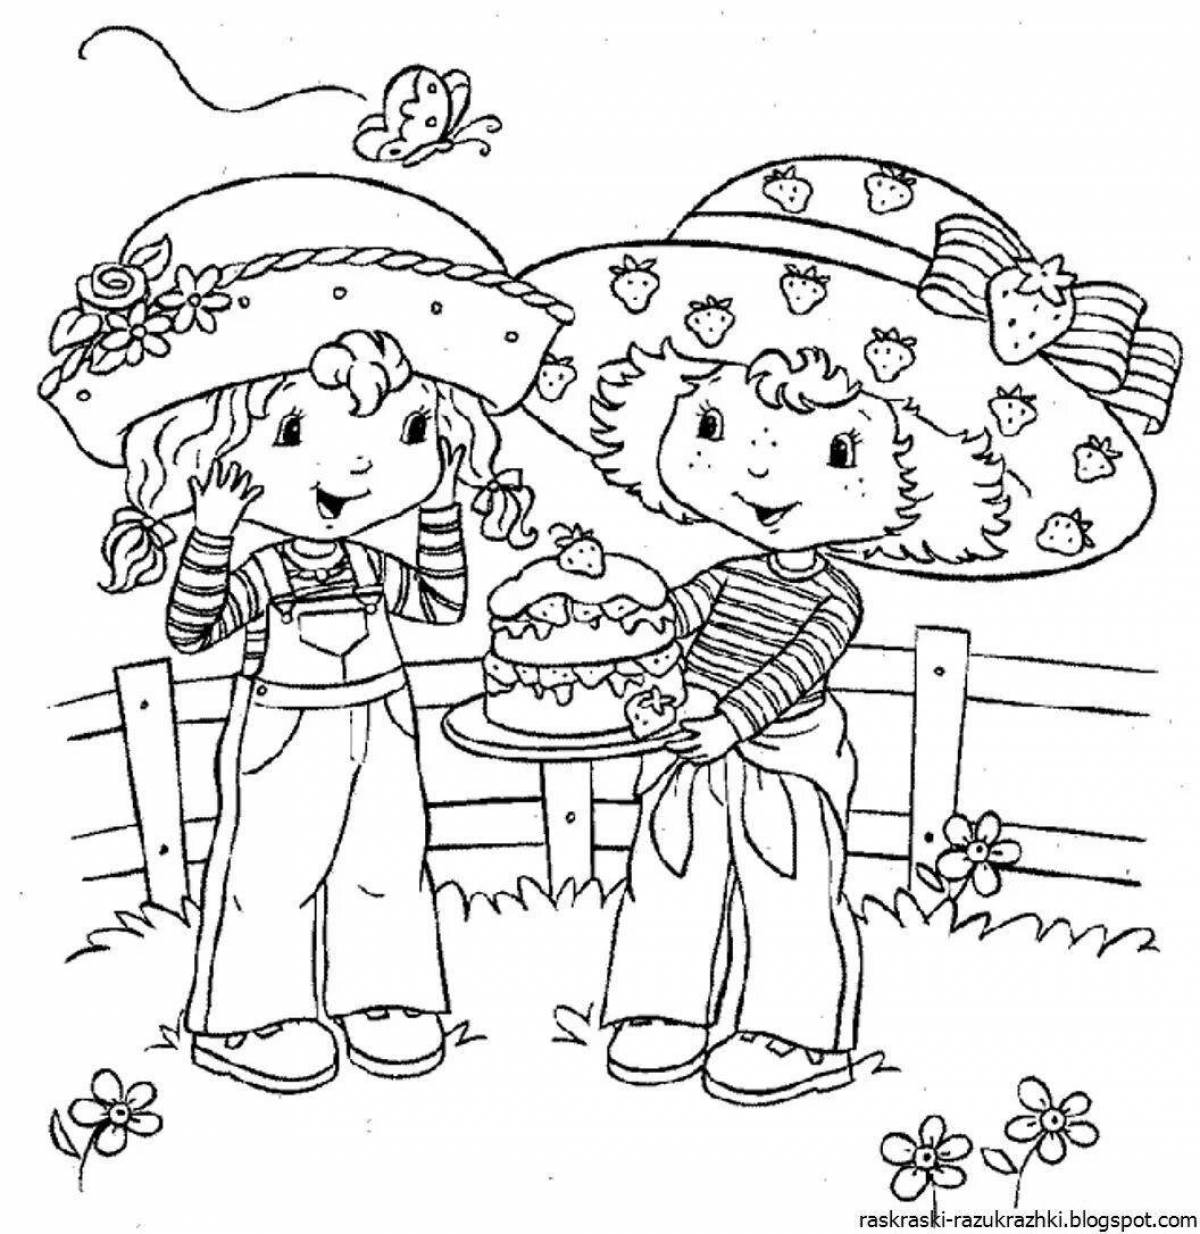 Glorious friendship coloring page